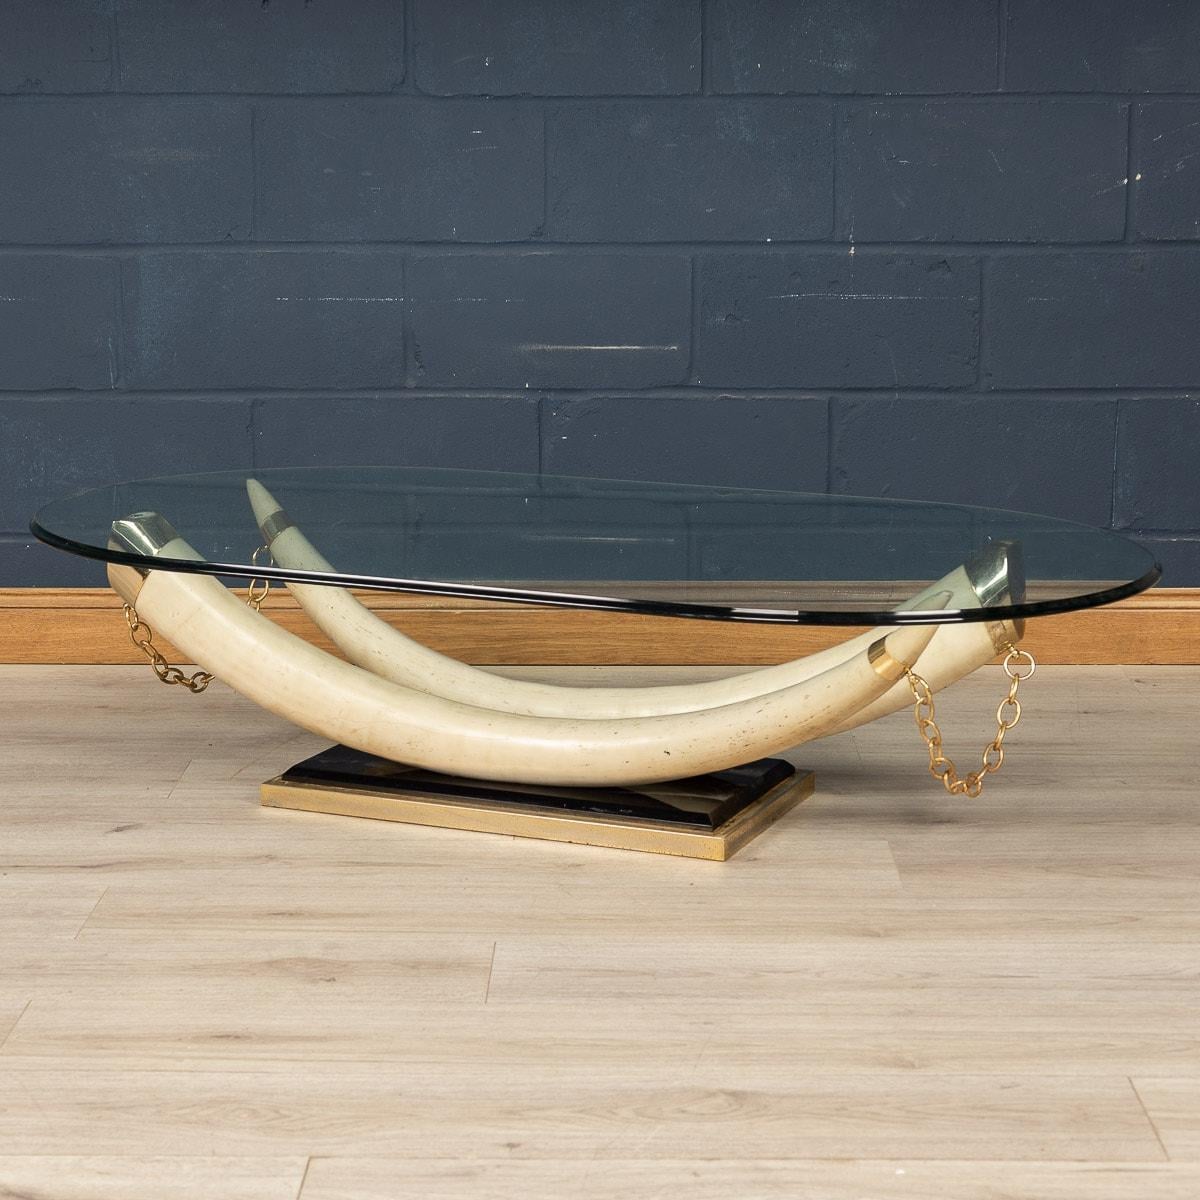 A striking French made coffee table in the early 1970s. The faux elephant tusks are made entirely out of resin and connected by a gold coloured chain over a black rectangular base with a brass surround. The tusks support an oval bevelled glass, all